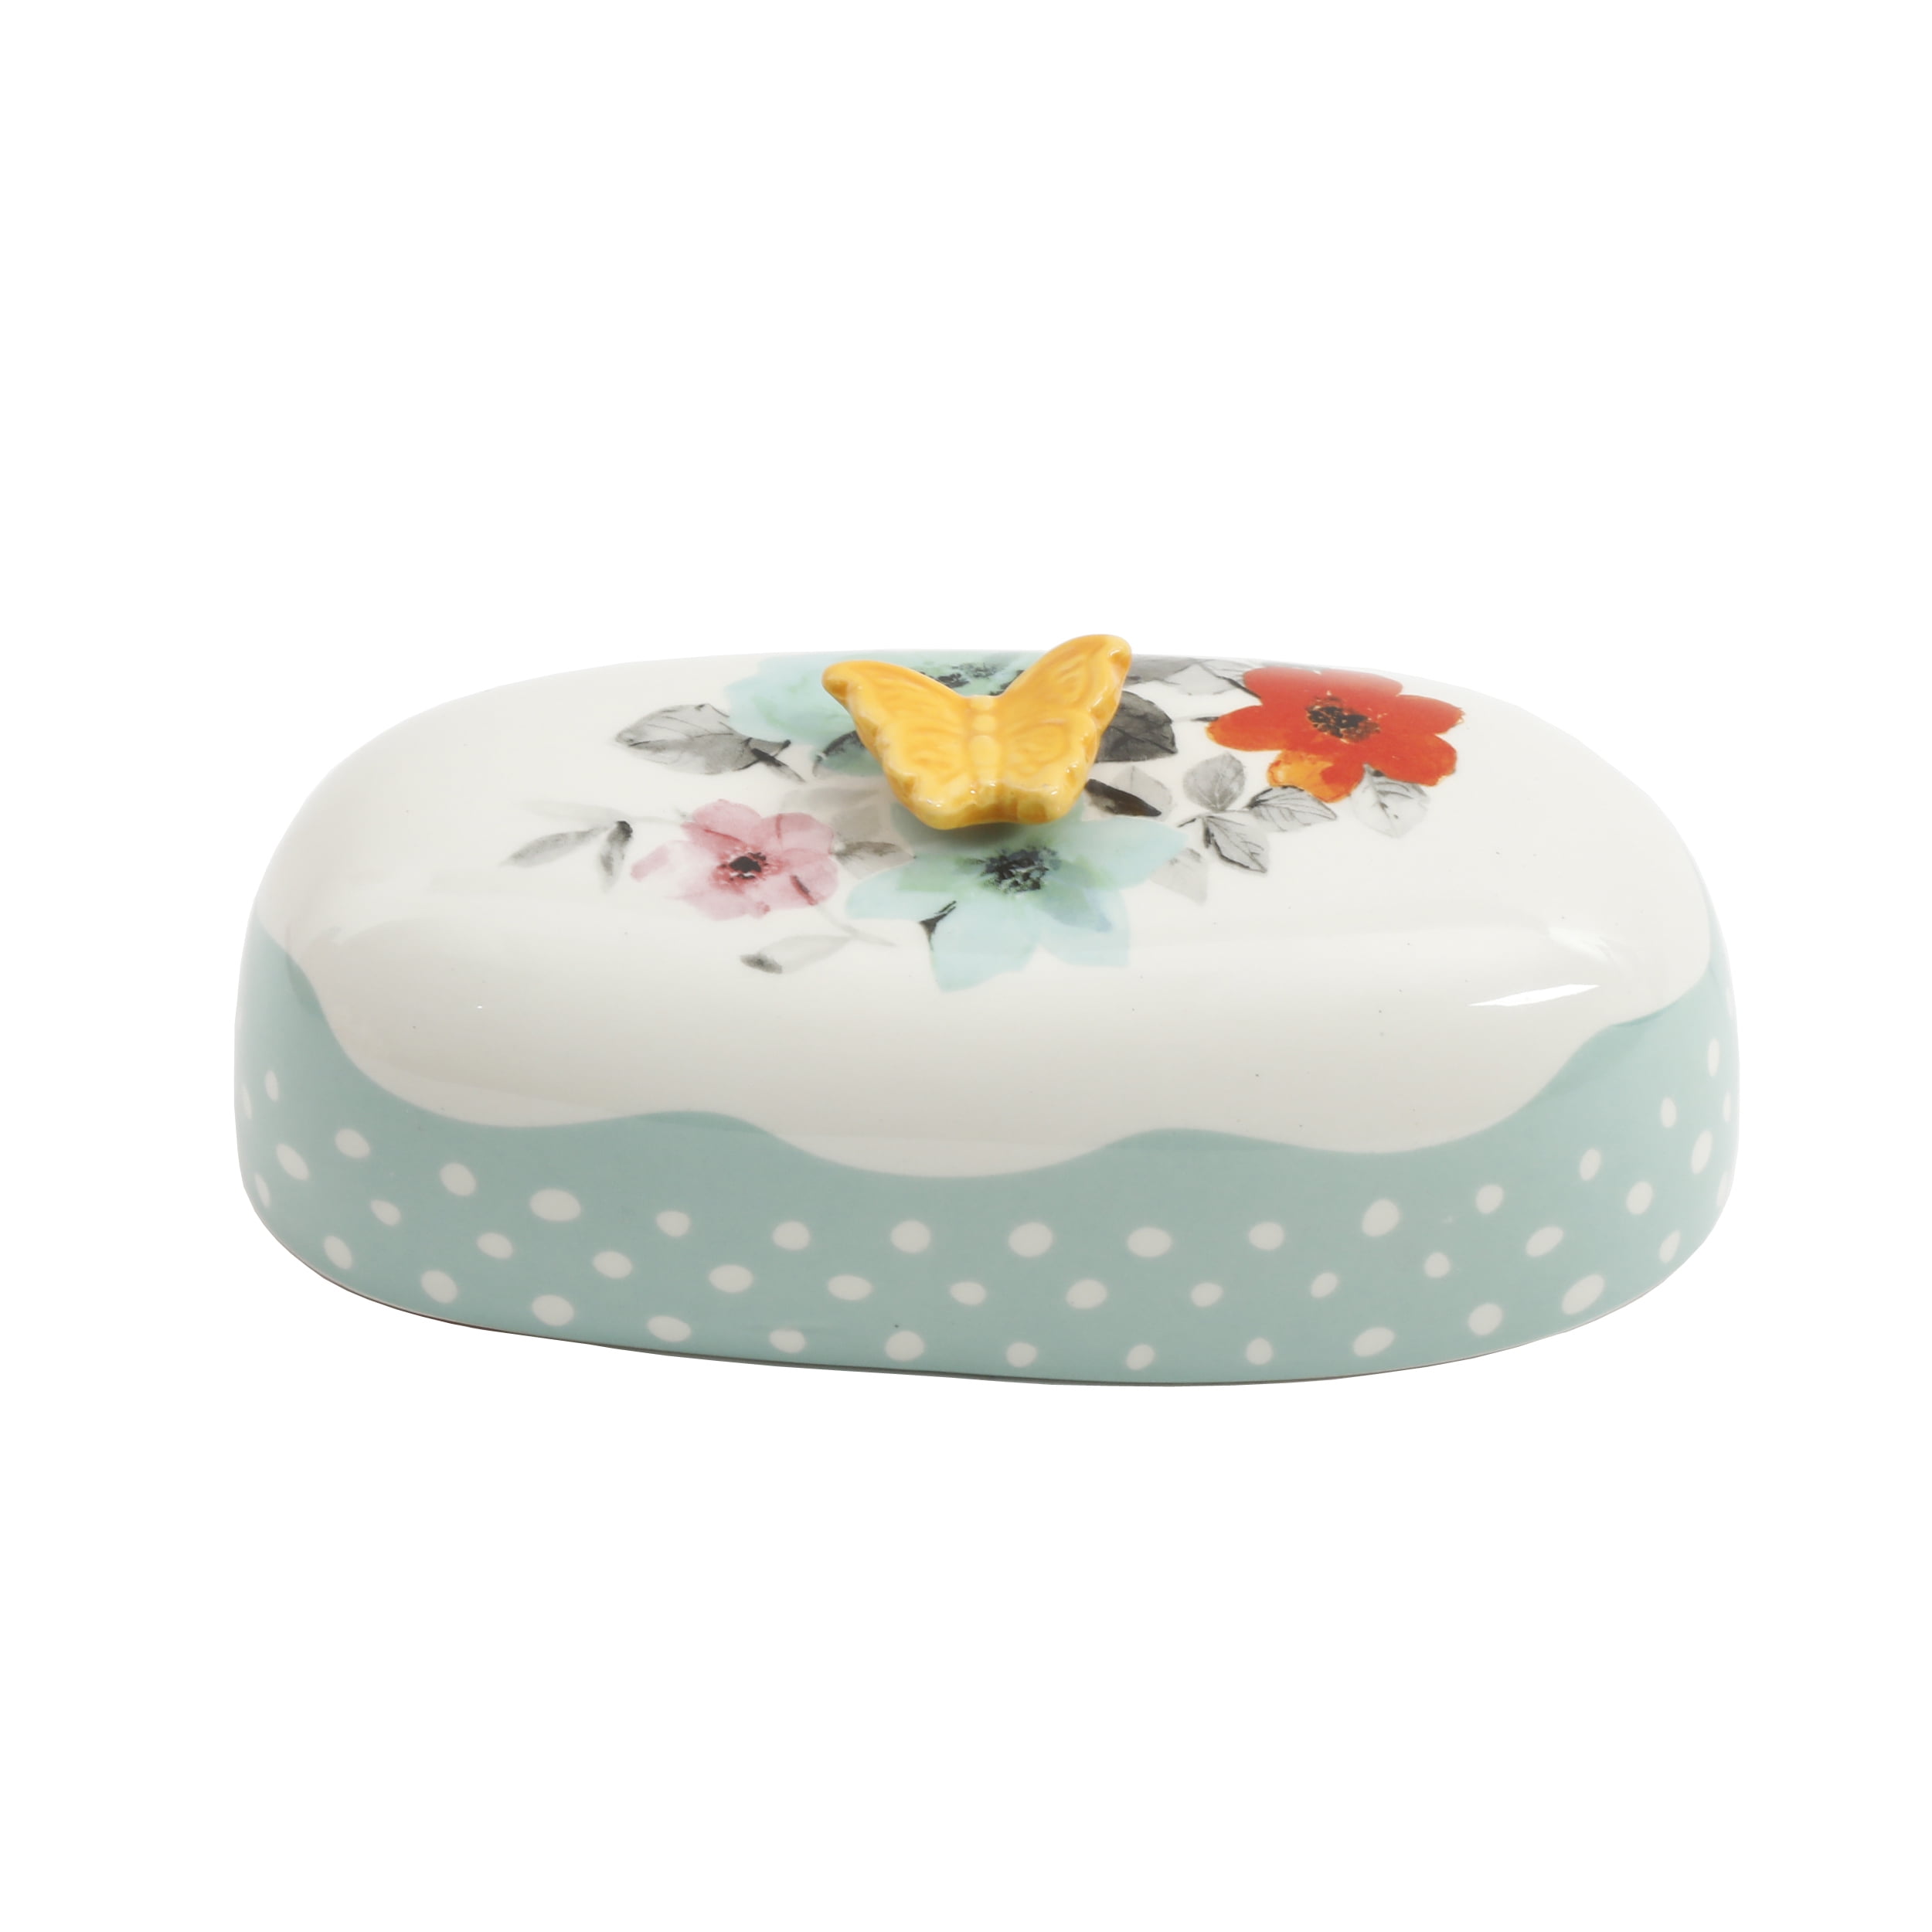 The Pioneer Woman Flea Market Decorated Floral 6.4 Butter Dish 